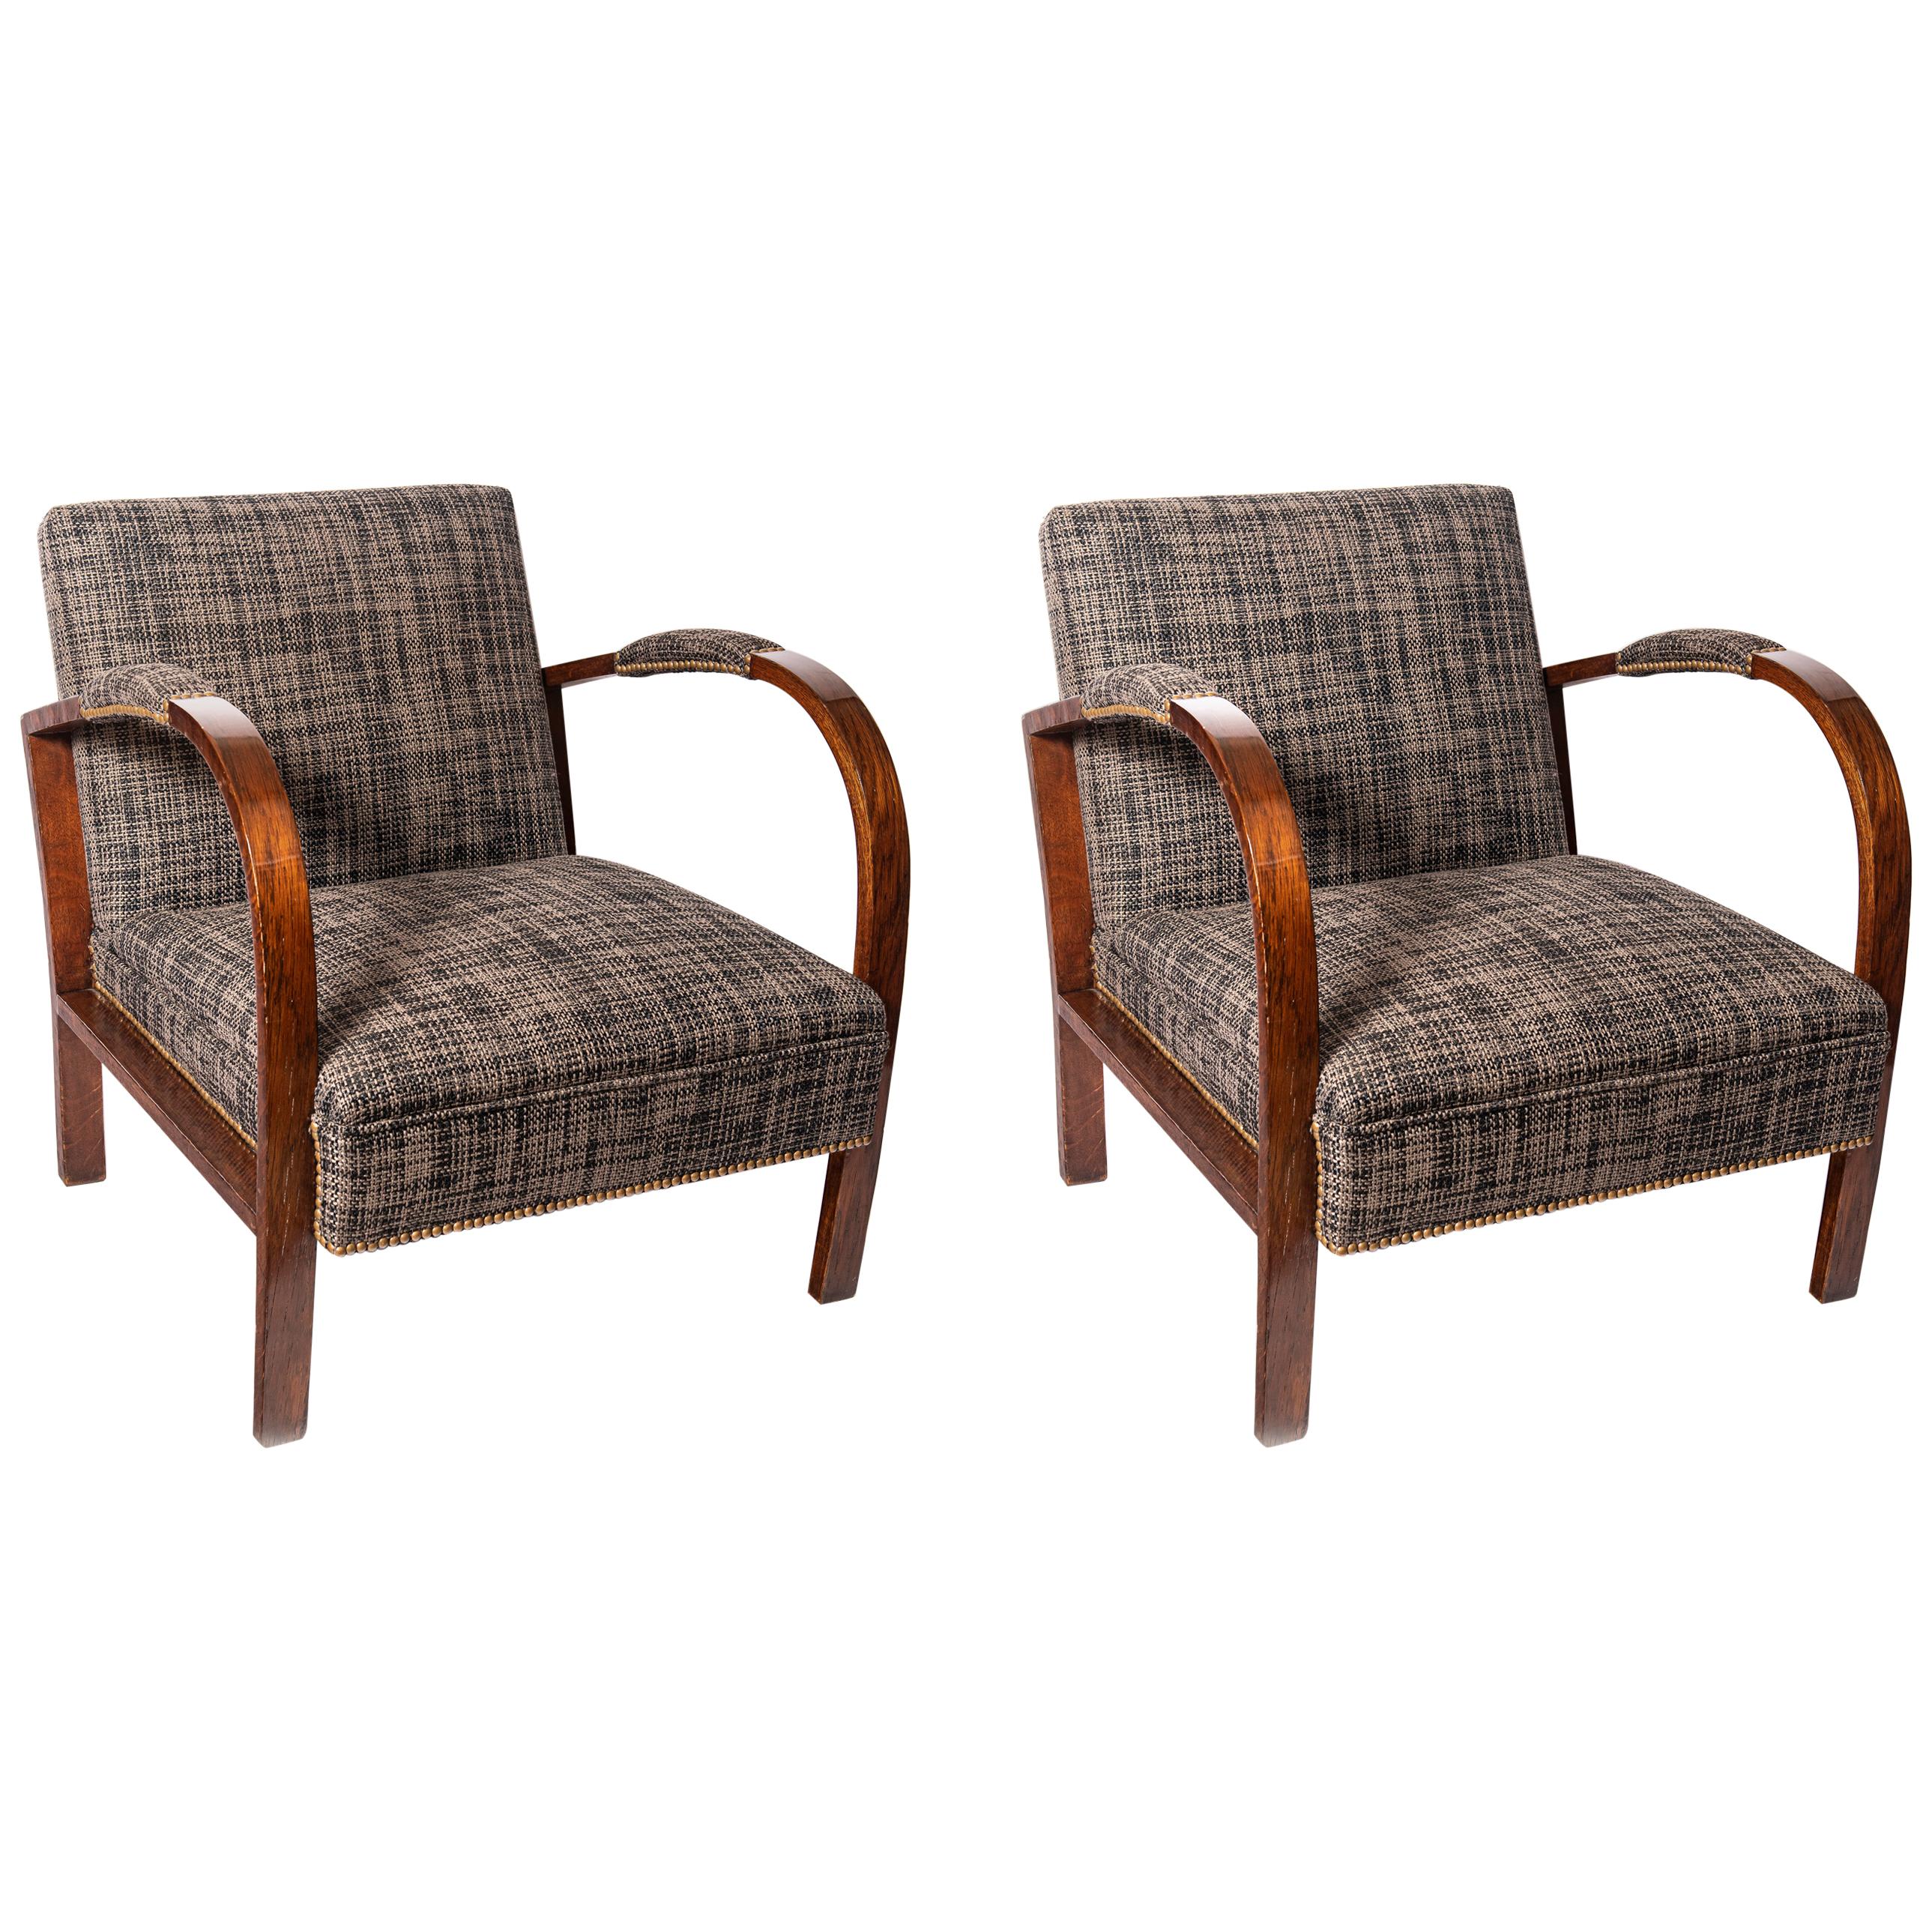 Pair of Oakwood and Fabric Armchairs, Art Deco Period, France, circa 1940